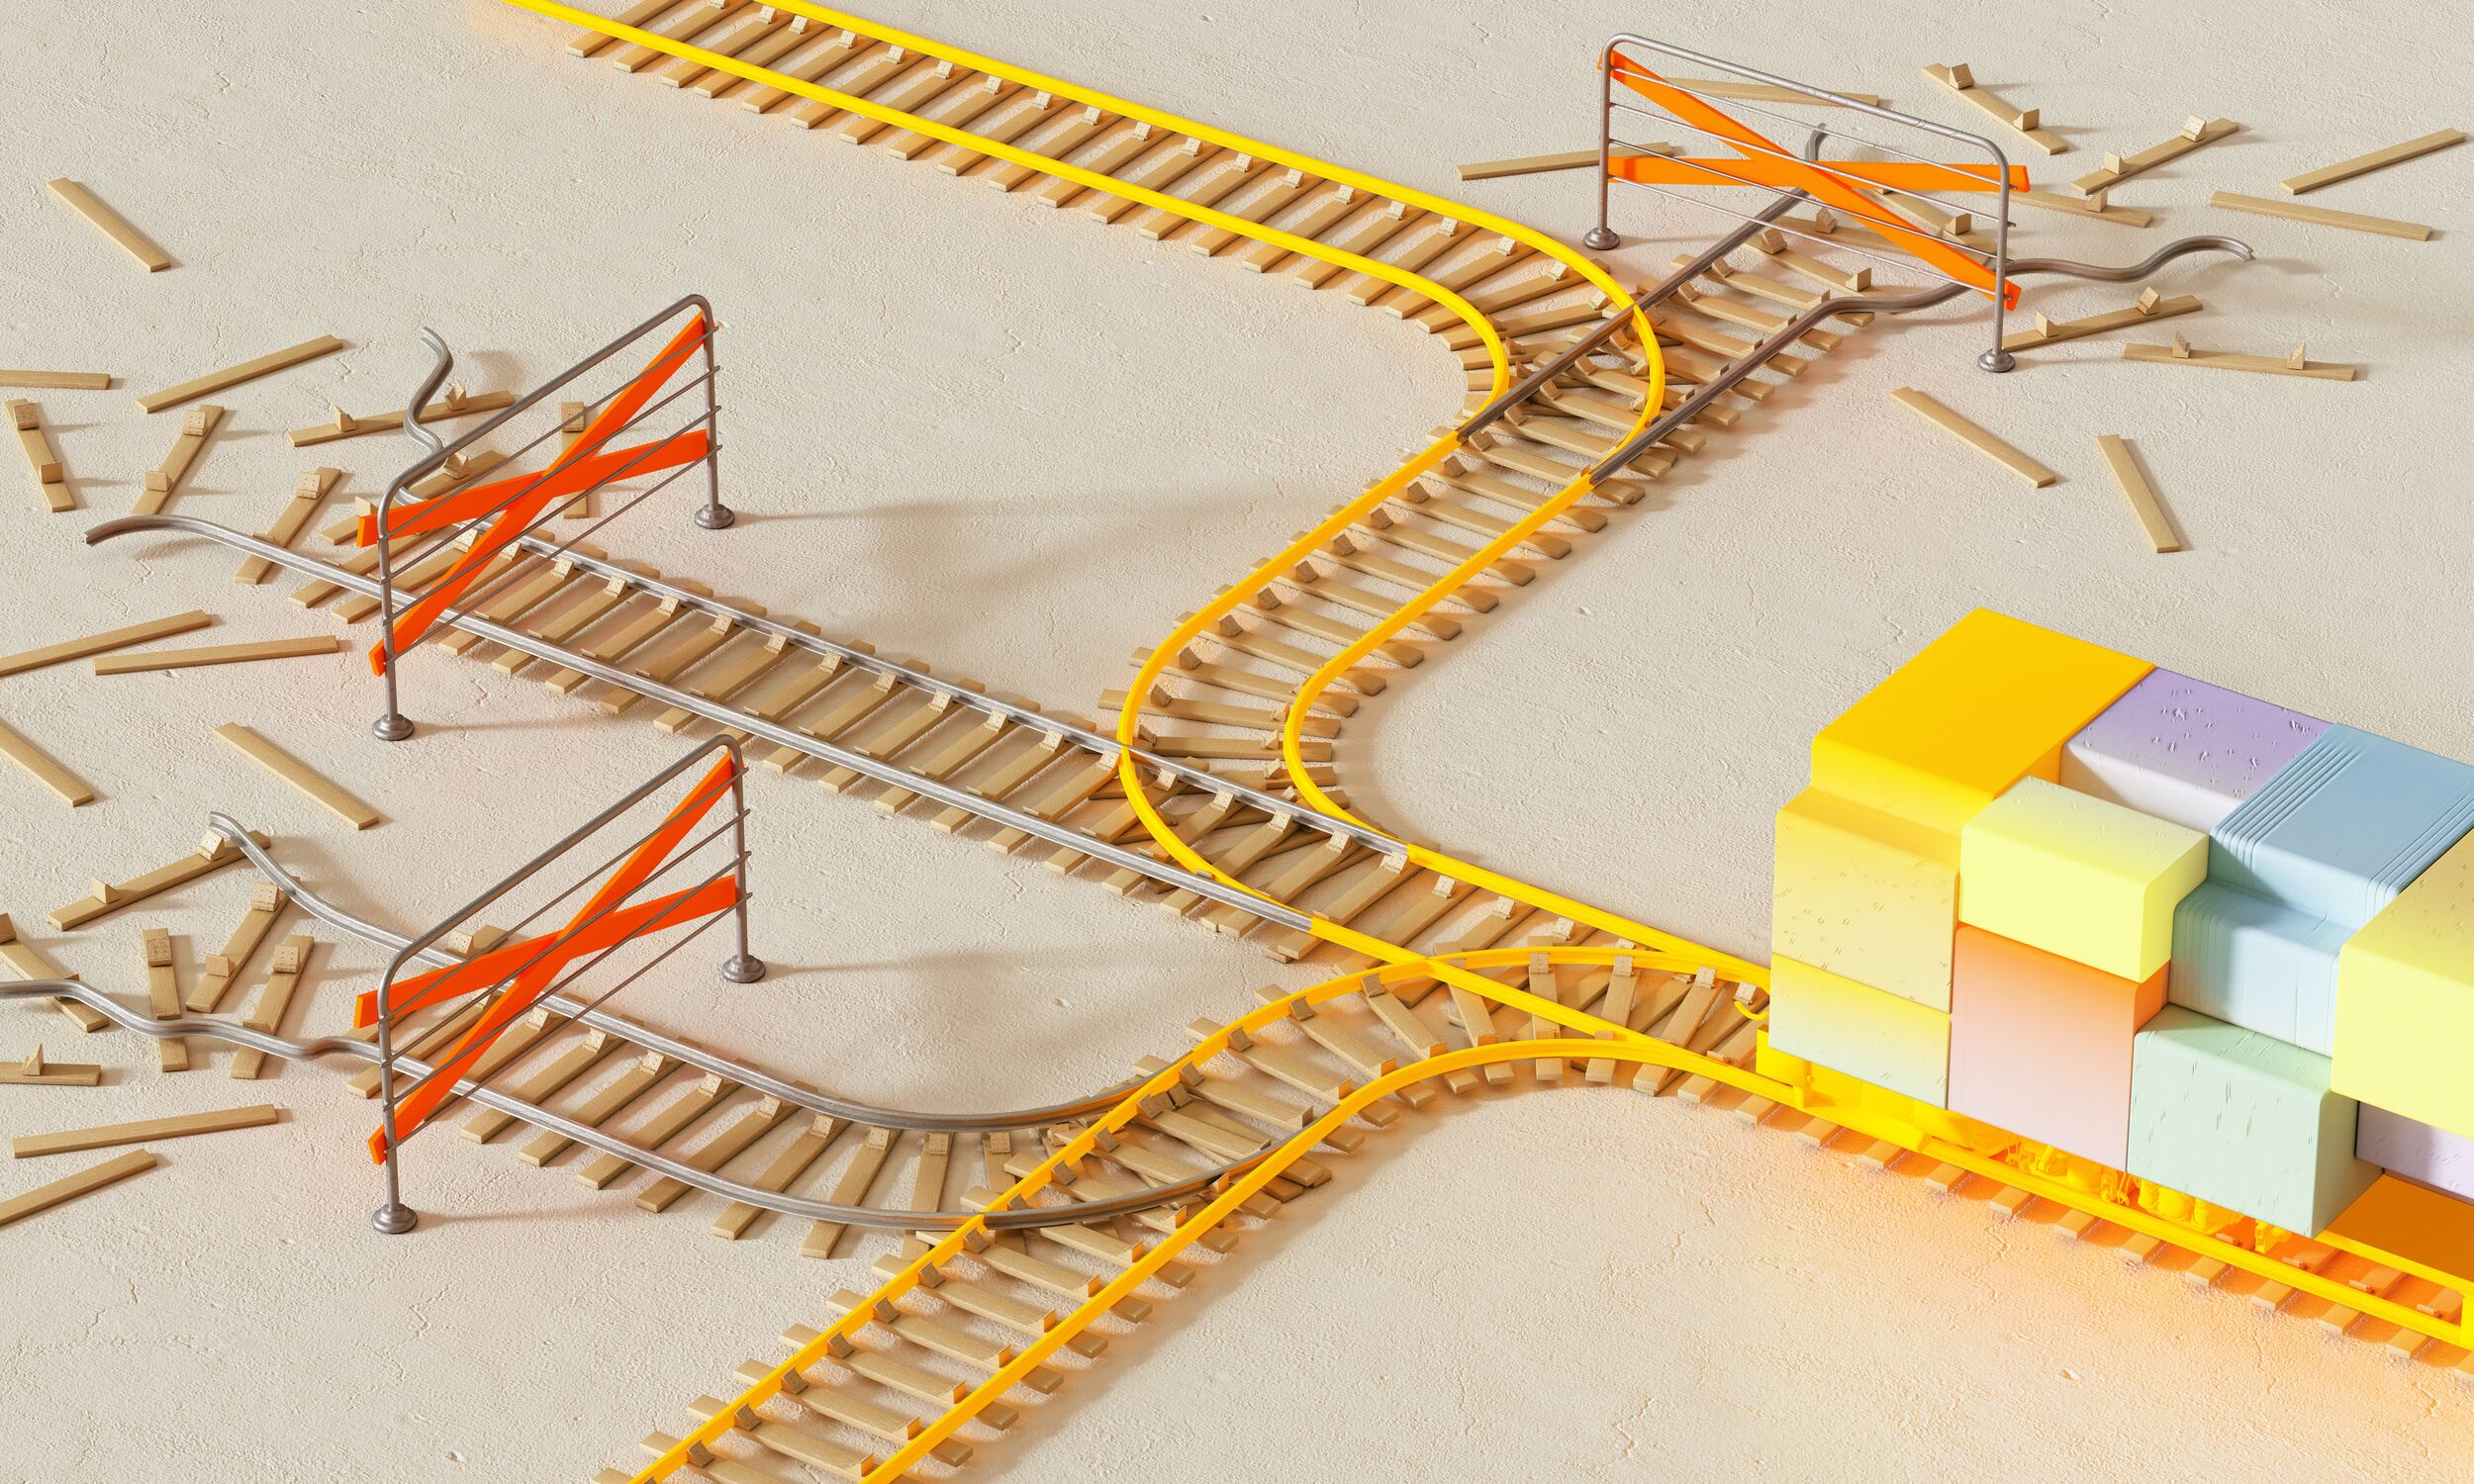 Illustration of a block train navigating a track with turns and stop barriers.